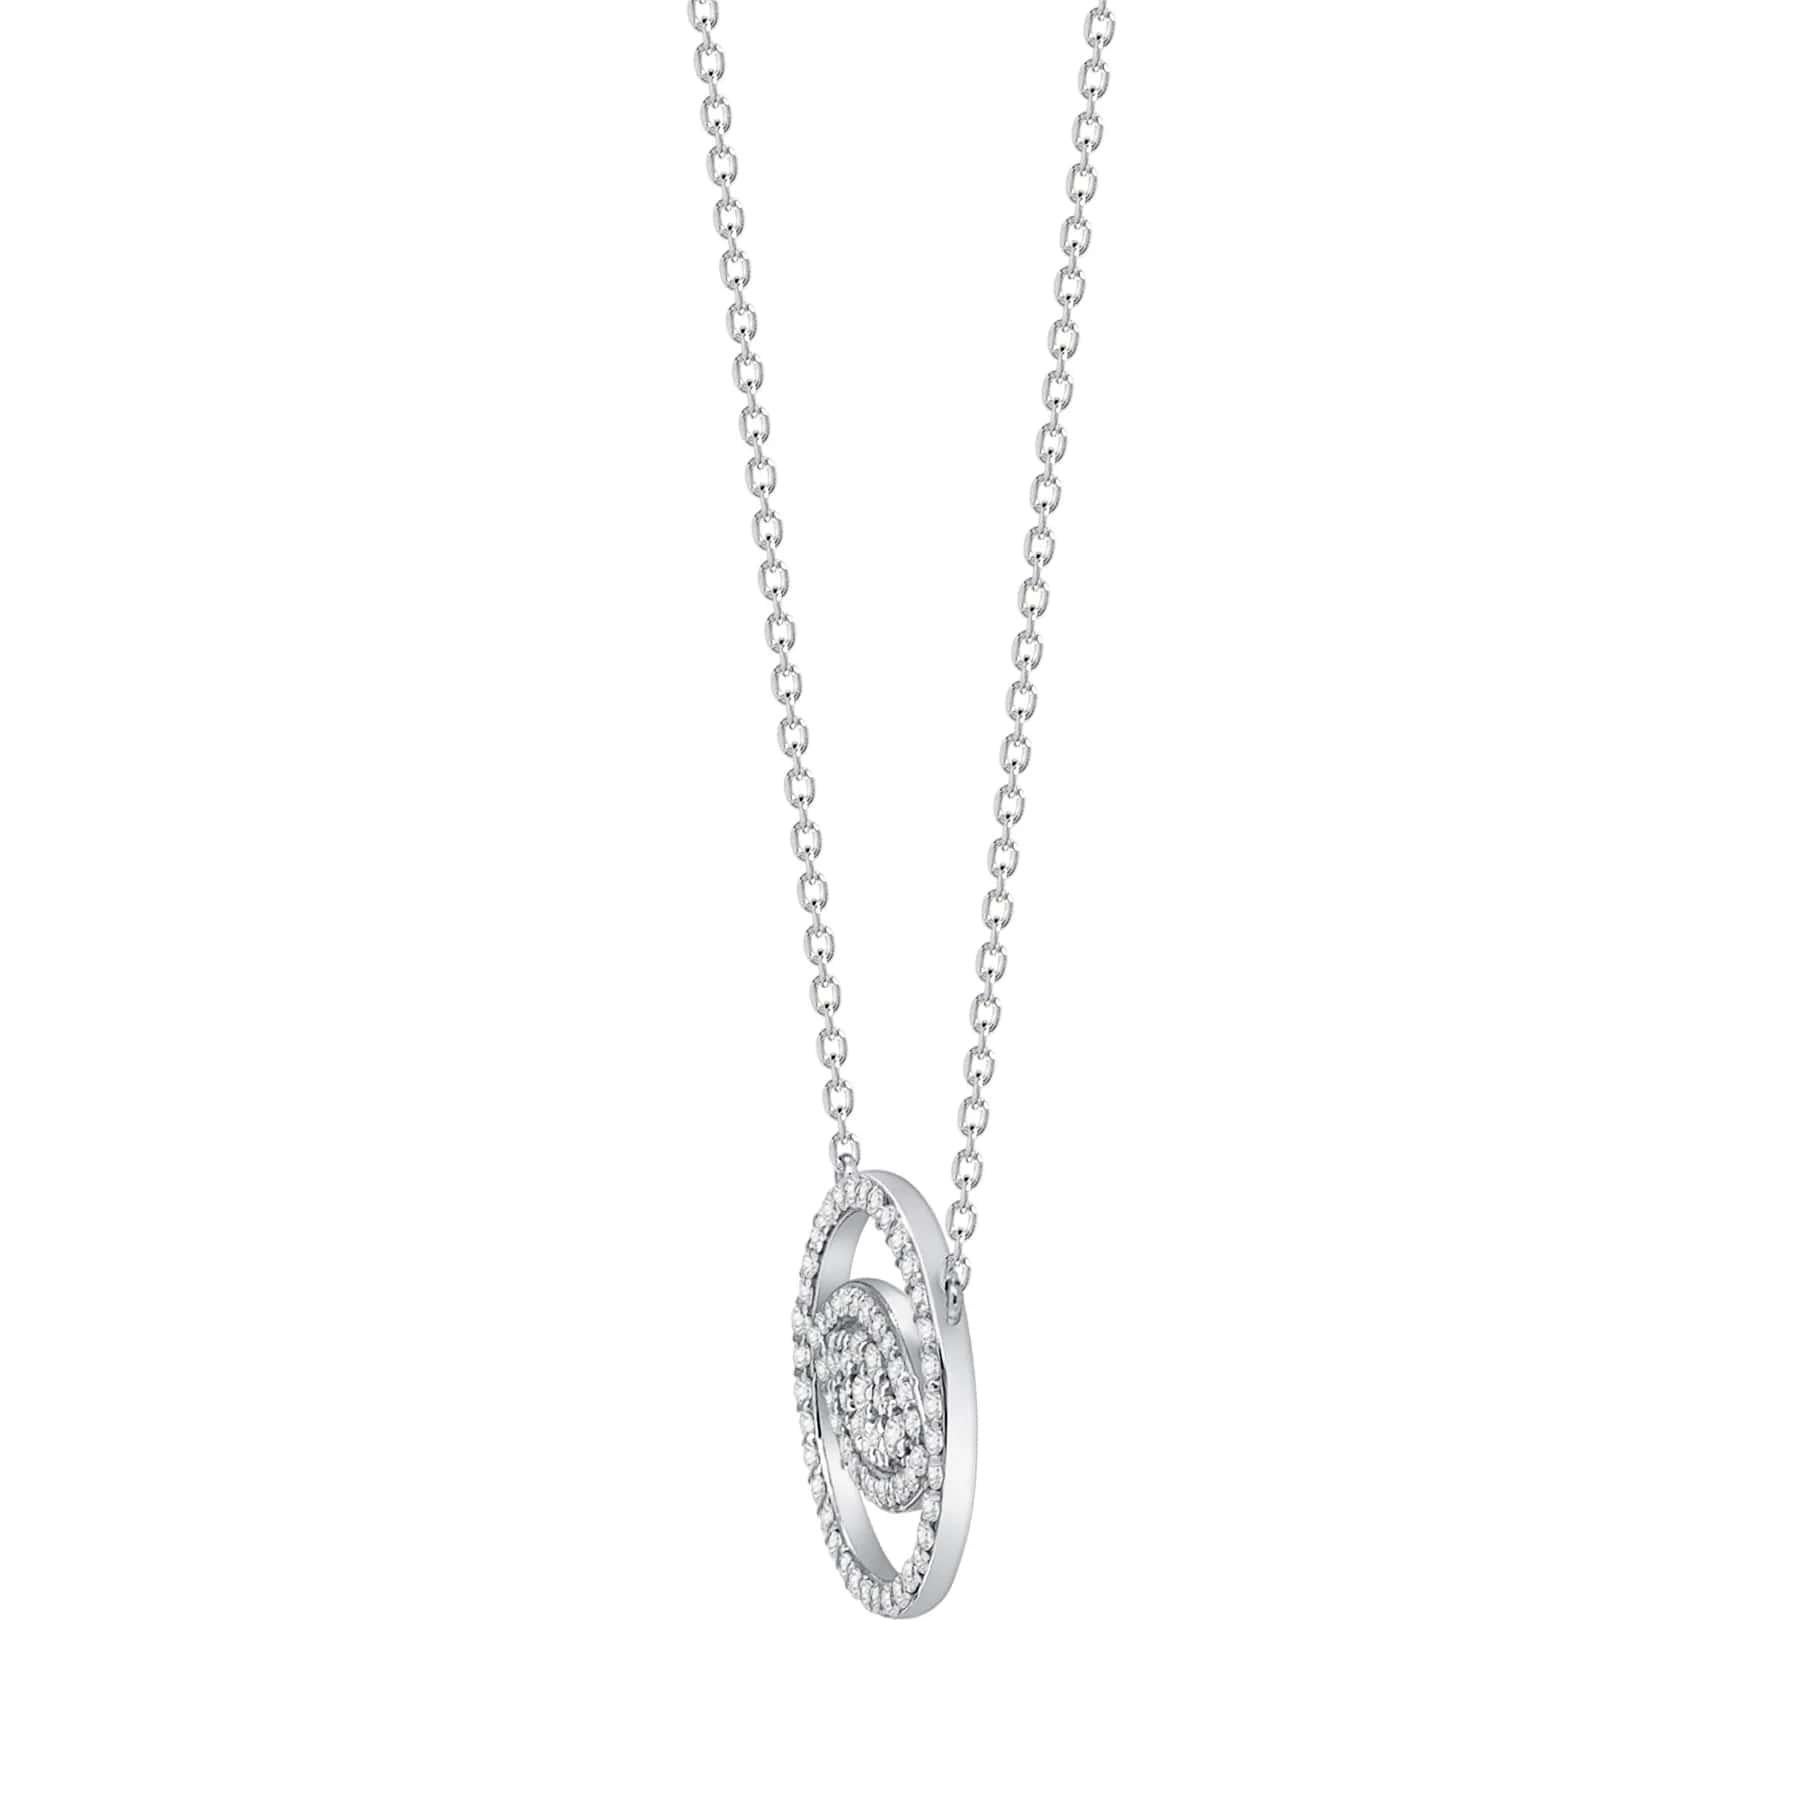 This Evil Eye Diamond Necklace provides both a spiritual and fashionable on trend look. A perfect gift for family members and friends.

Metal : 14k Gold
Diamond Cut : Round
Total Diamond Carats : 1 Carat
Diamond Clarity : VS
Diamond Color :